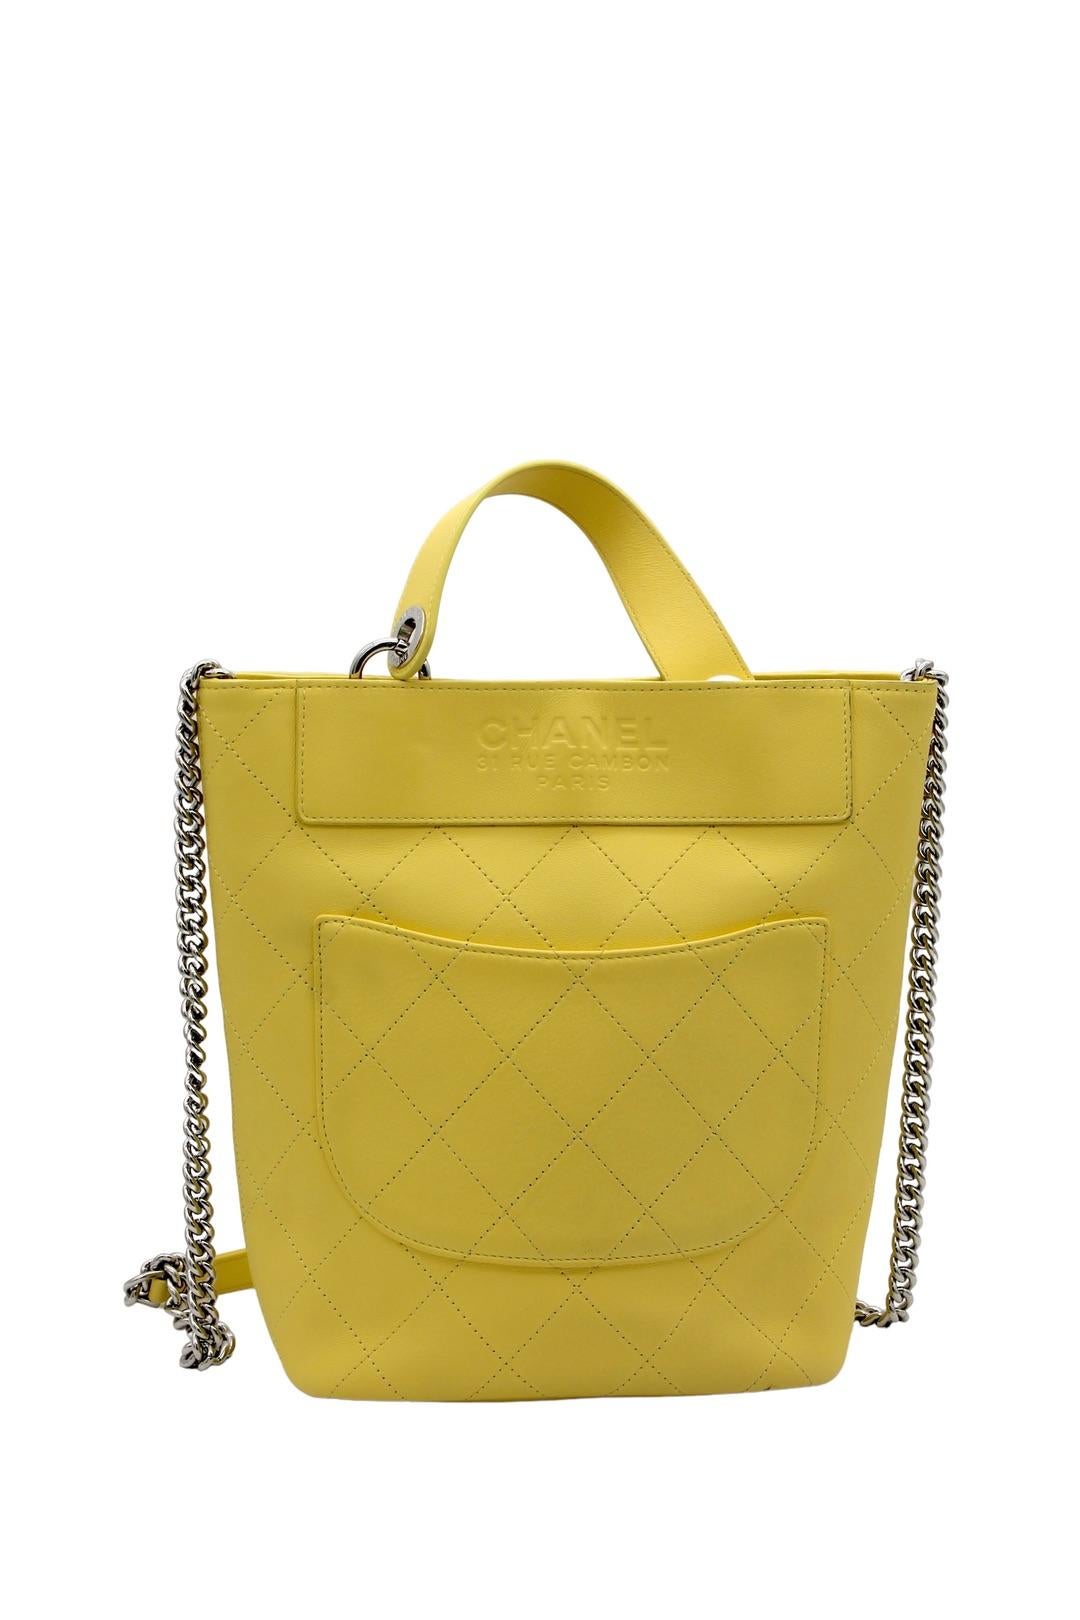 Chanel Yellow 31 Rue Cannborn Paris 

This Chanel Yellow 31 Rue Cannborn Paris bag is a unique and stylish piece that is sure to turn heads wherever you go. It is made from high-quality lambskin and features a beautiful yellow color with the iconic